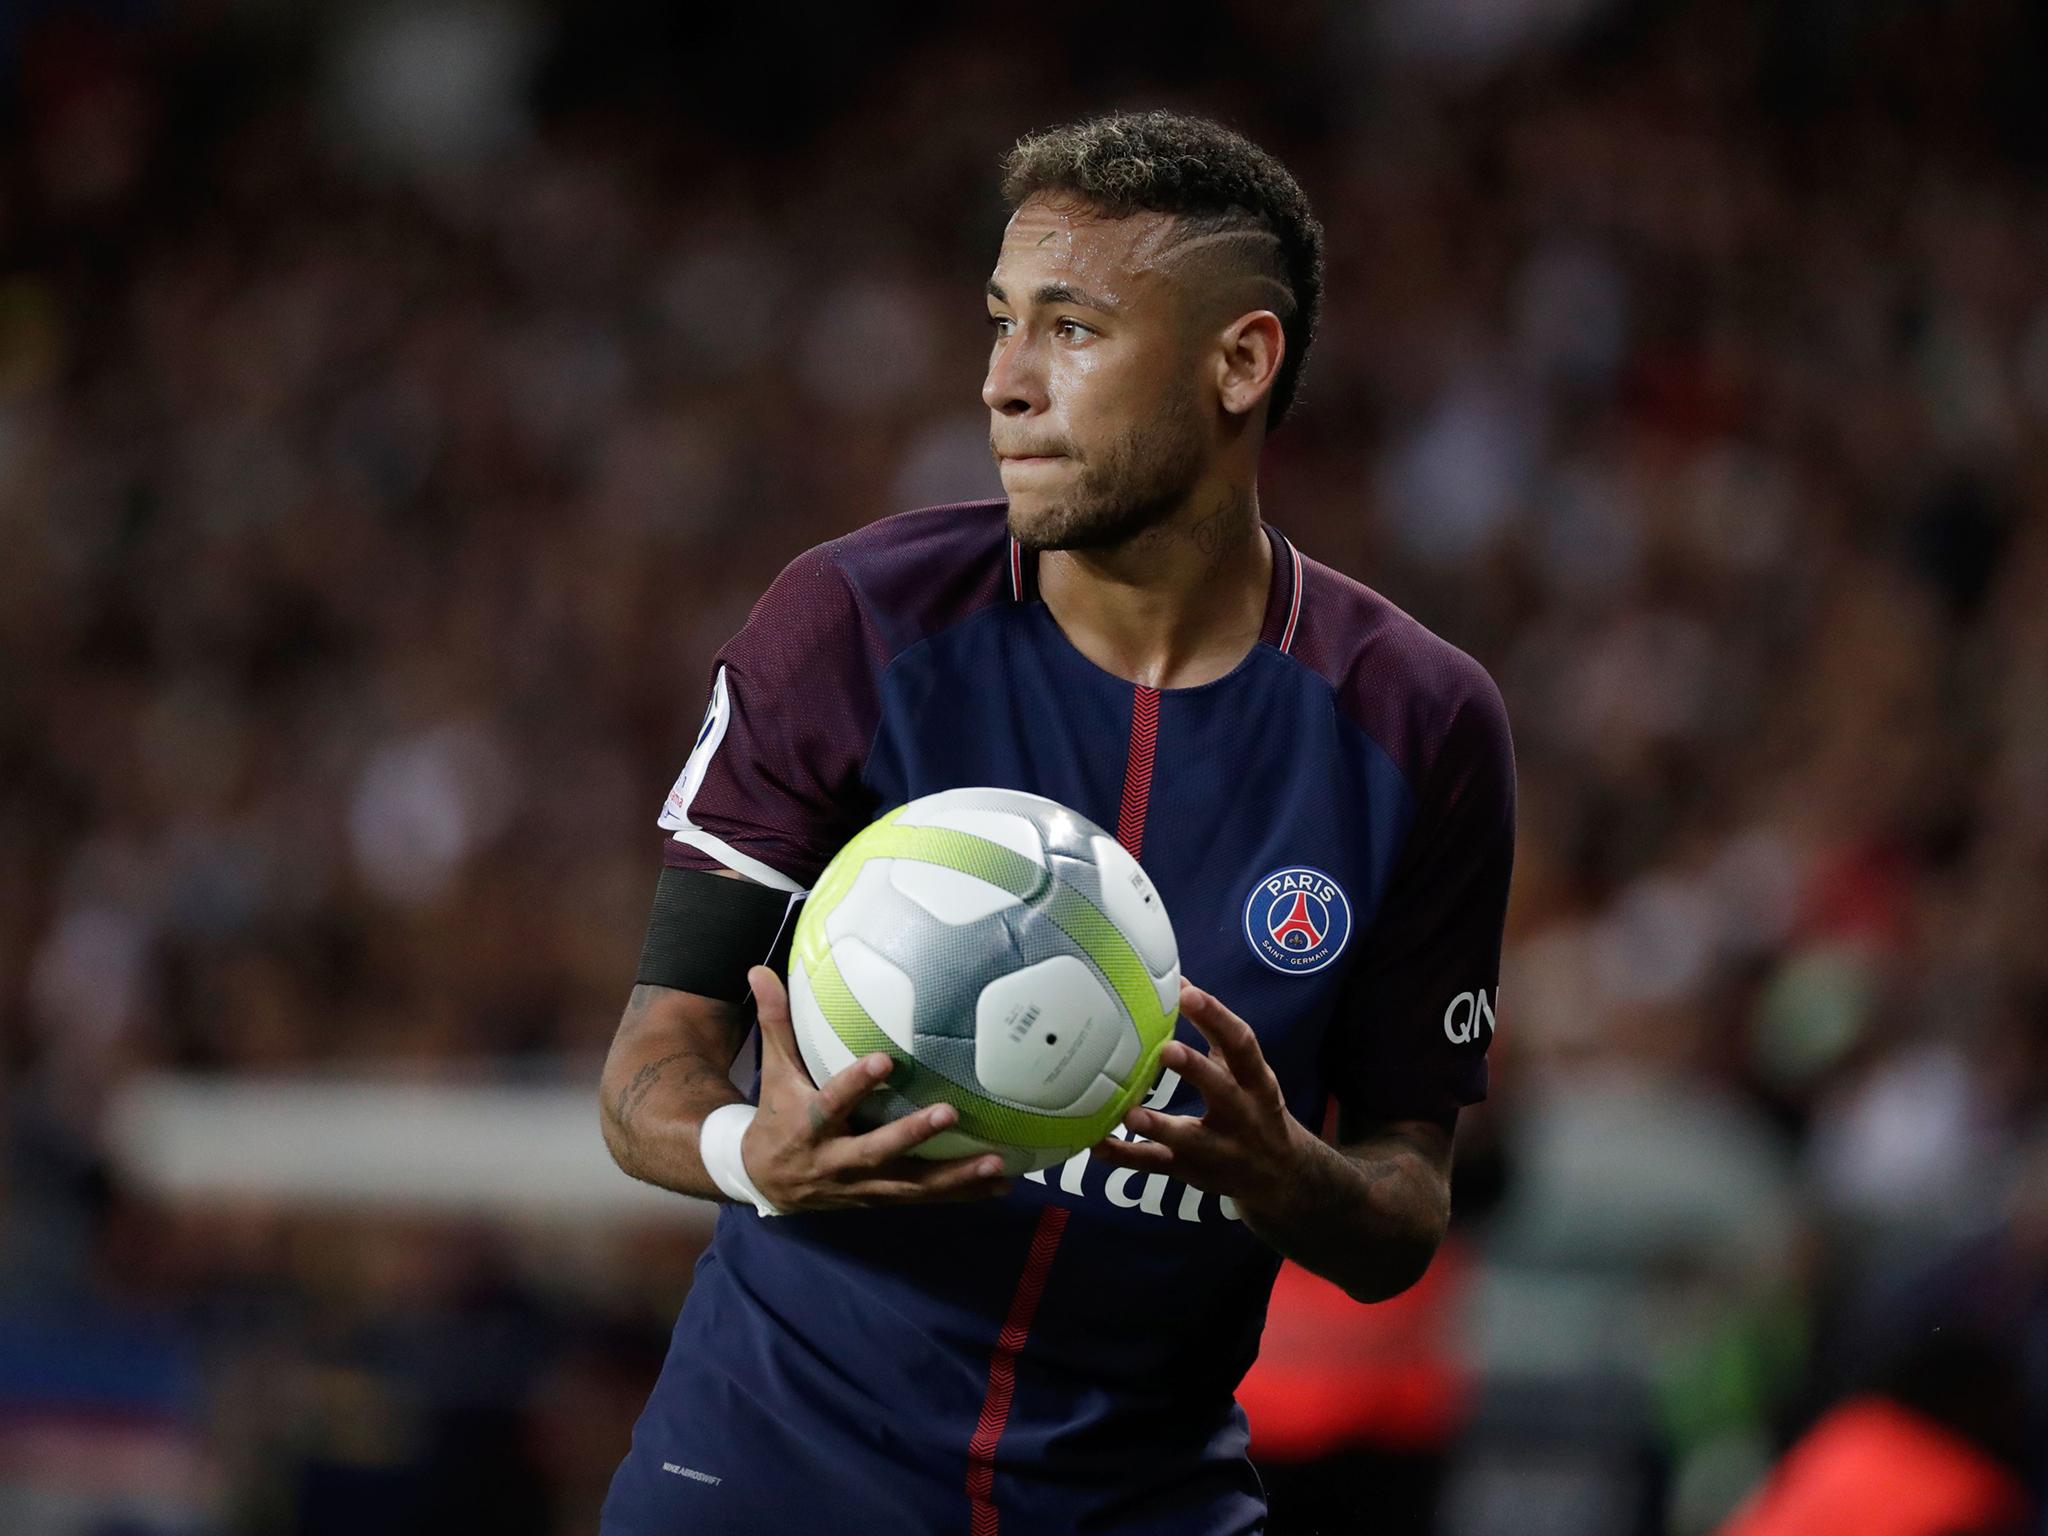 Neymar has criticised the board of directors at Barcelona after leaving the club